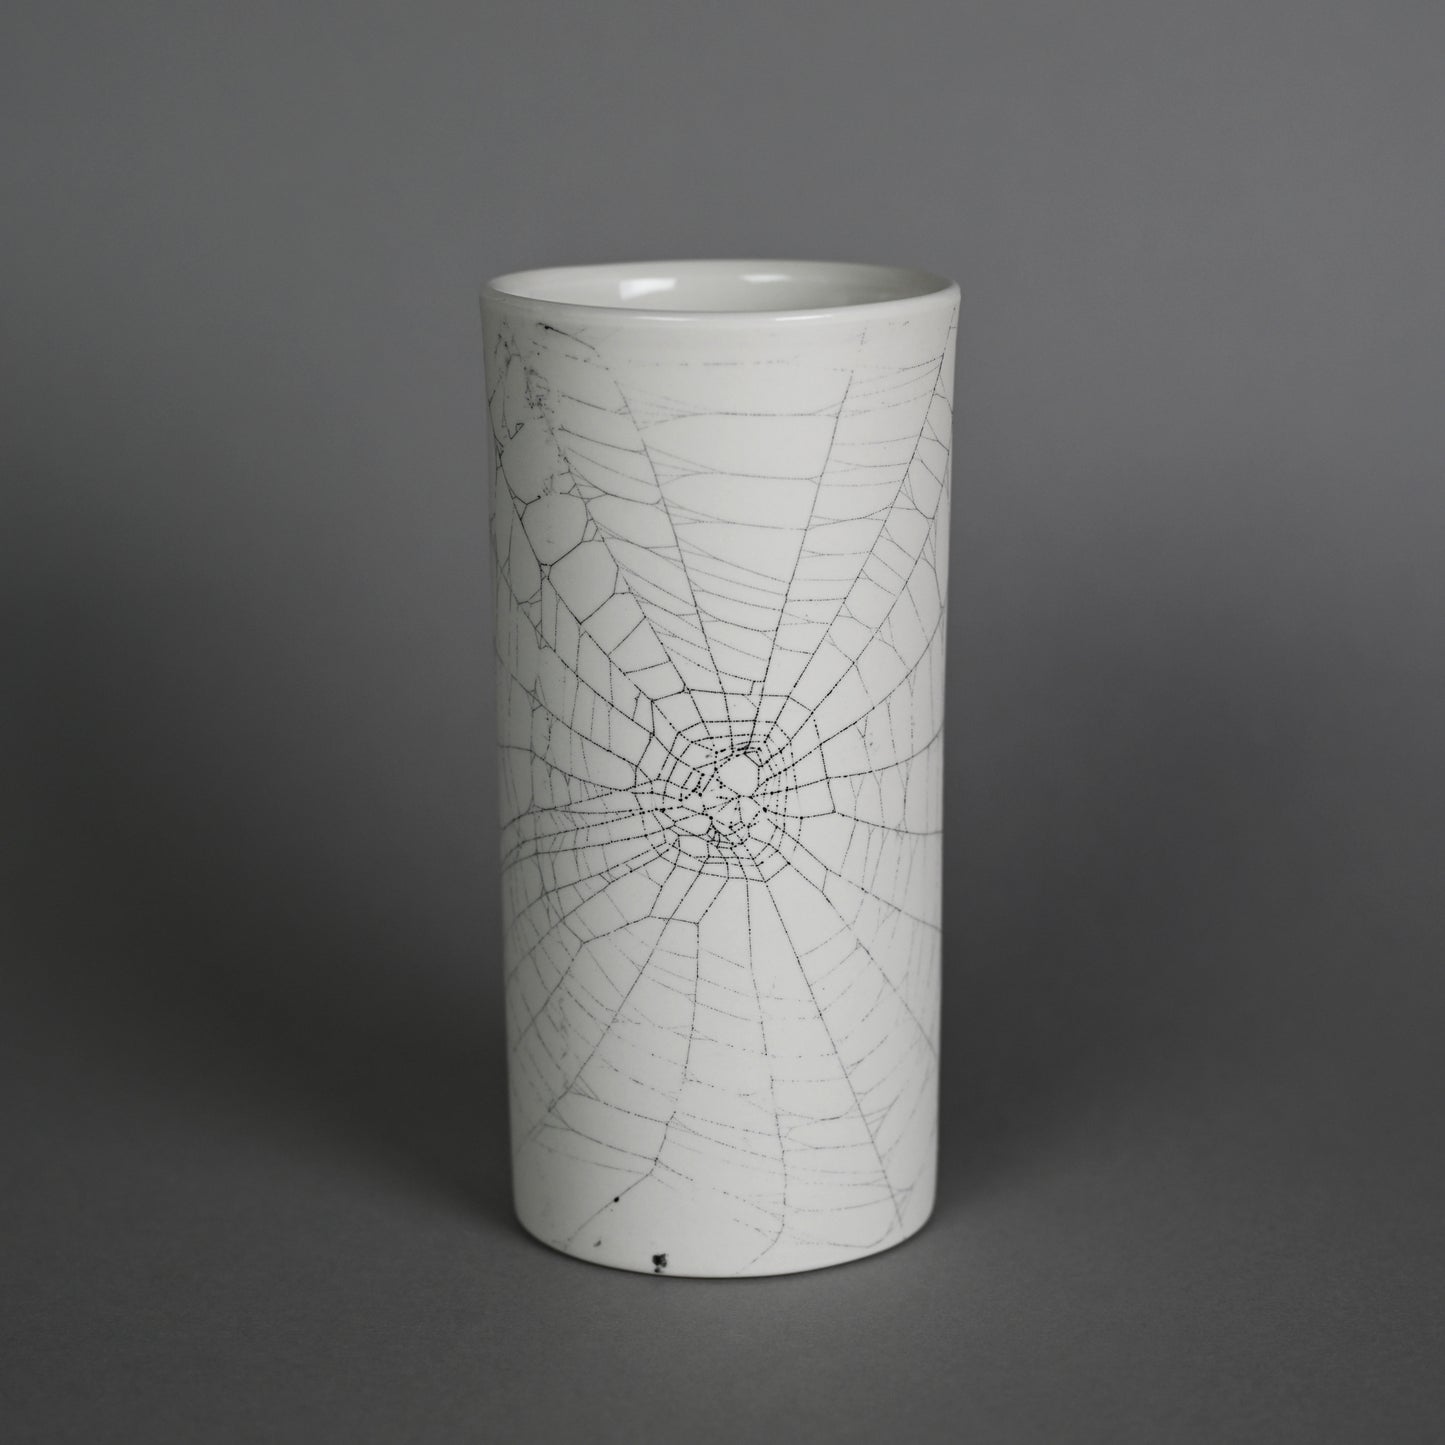 Web on Clay (186), Collected September 24, 2022